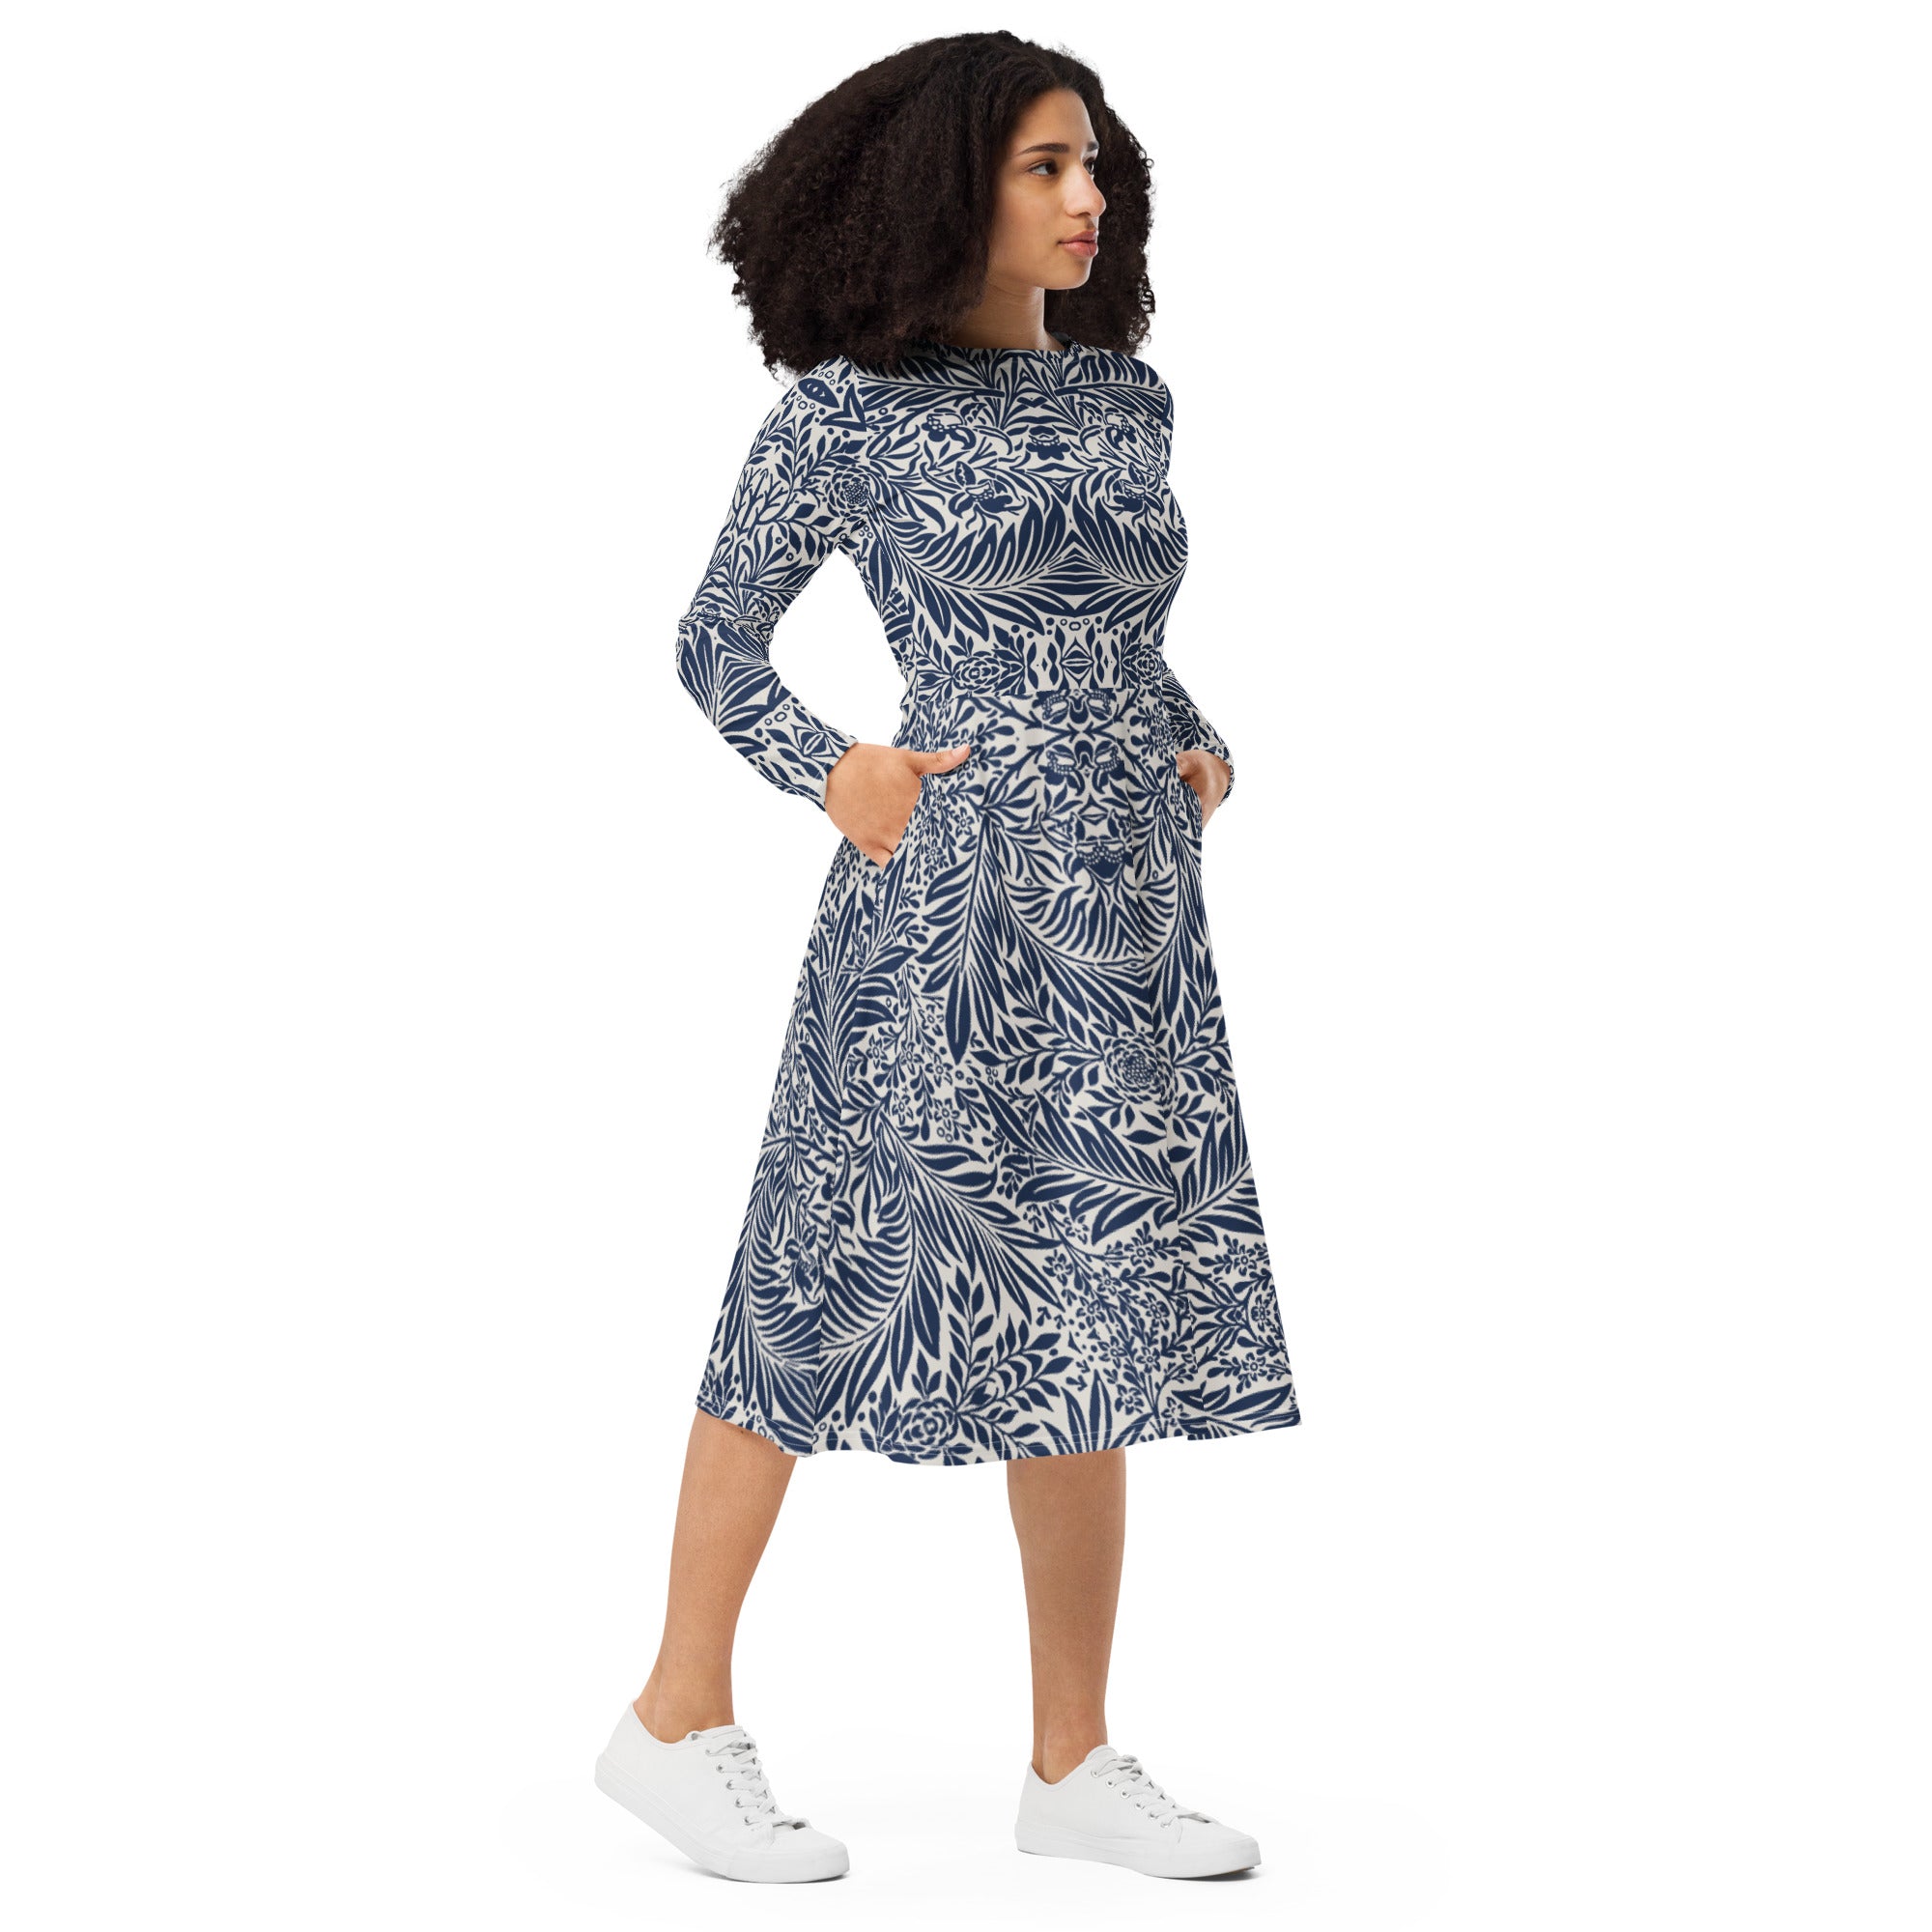 Blue and White Floral composition, Exclusive designed long sleeve midi dress, by Sensus Studio Design